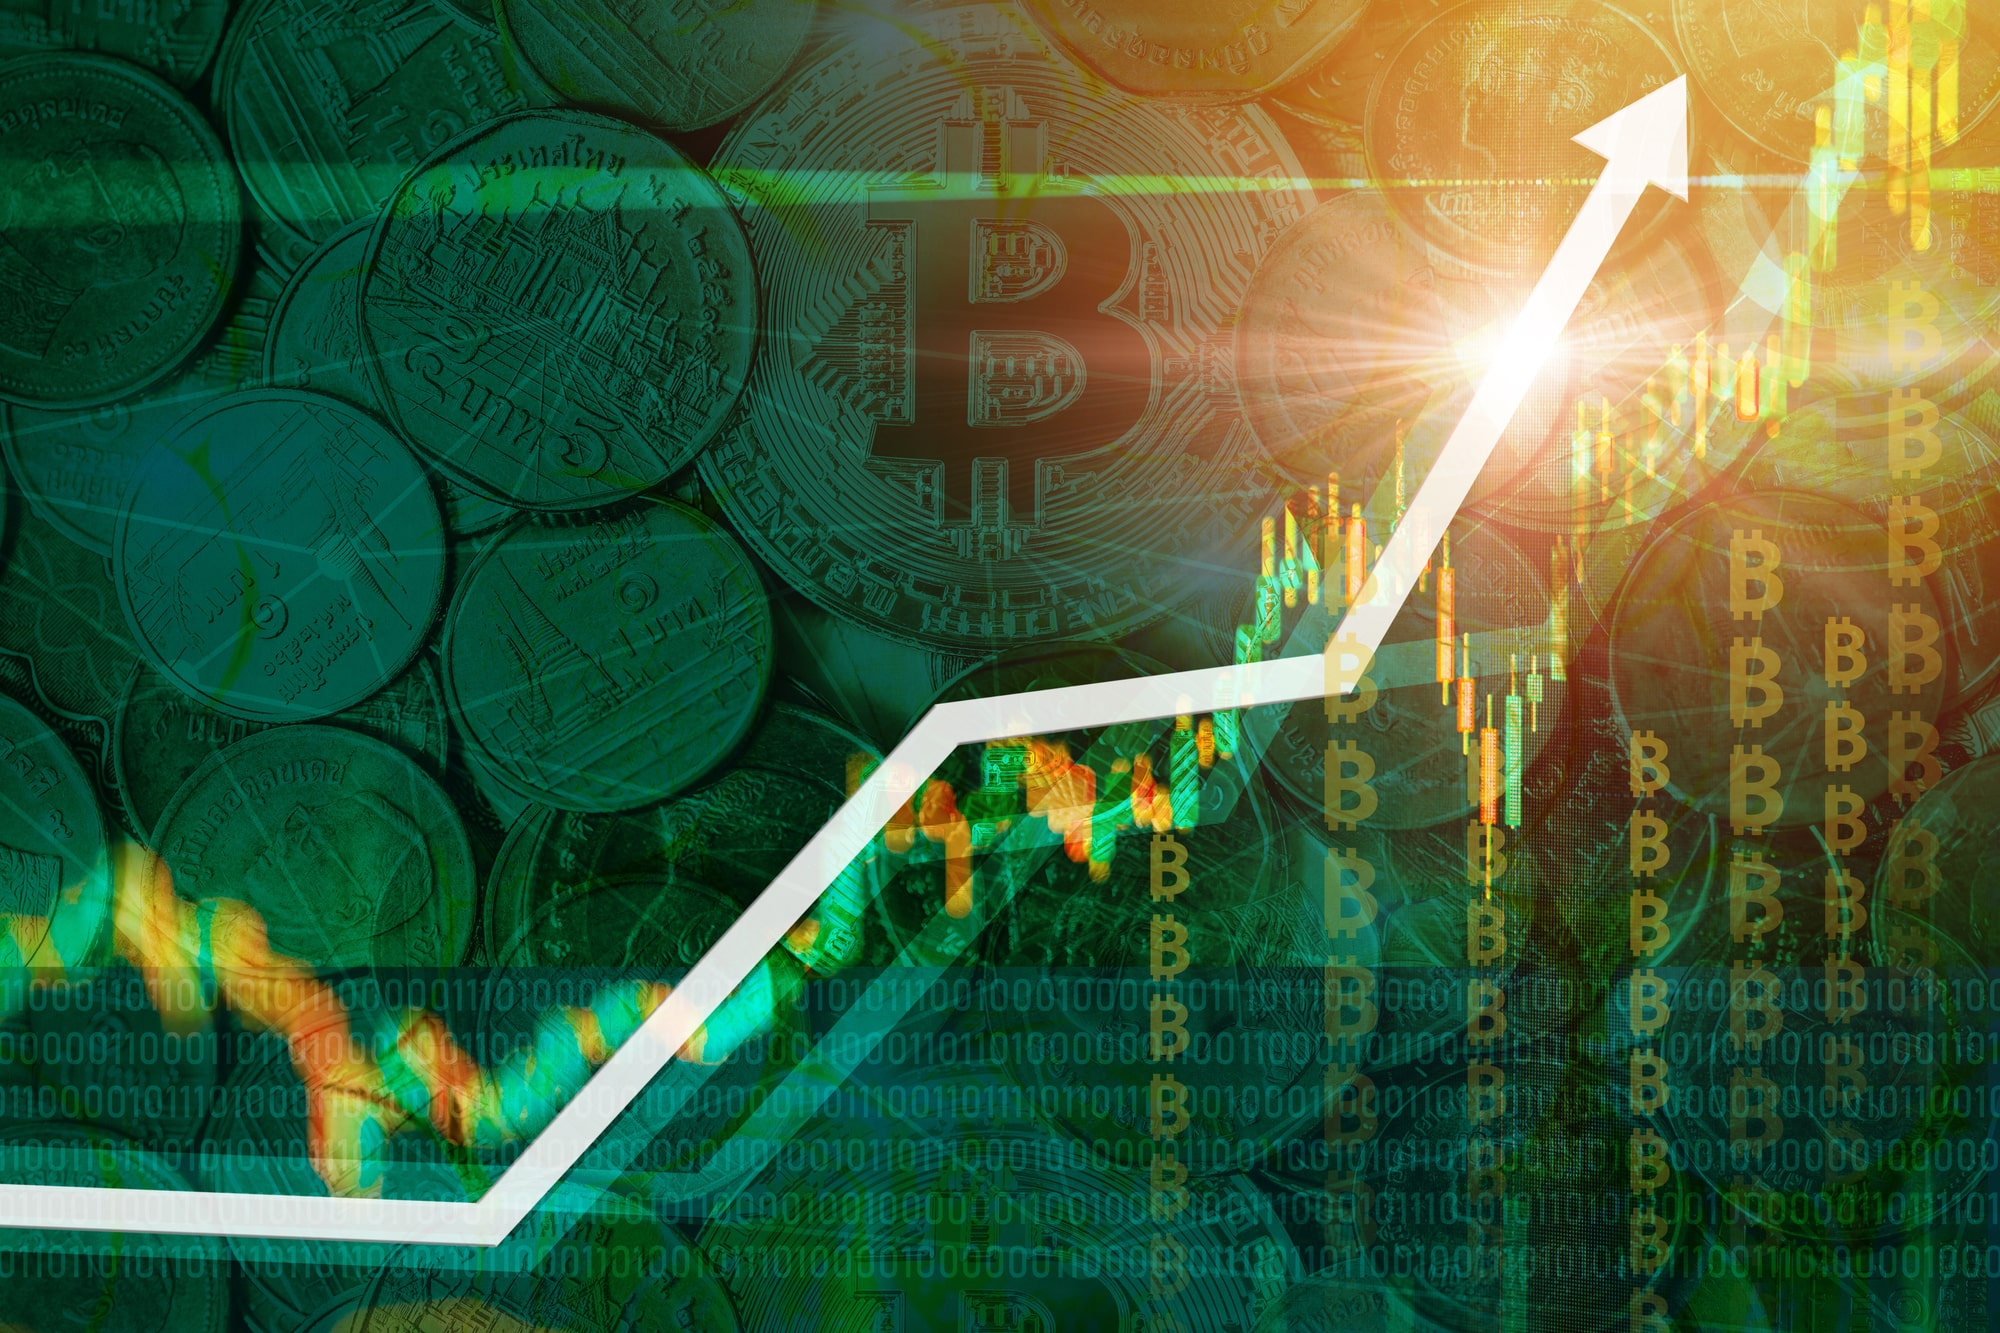 $1.5 Billion: Cryptocurrencies faced record inflows, as the Bitcoin ETFs trading launched